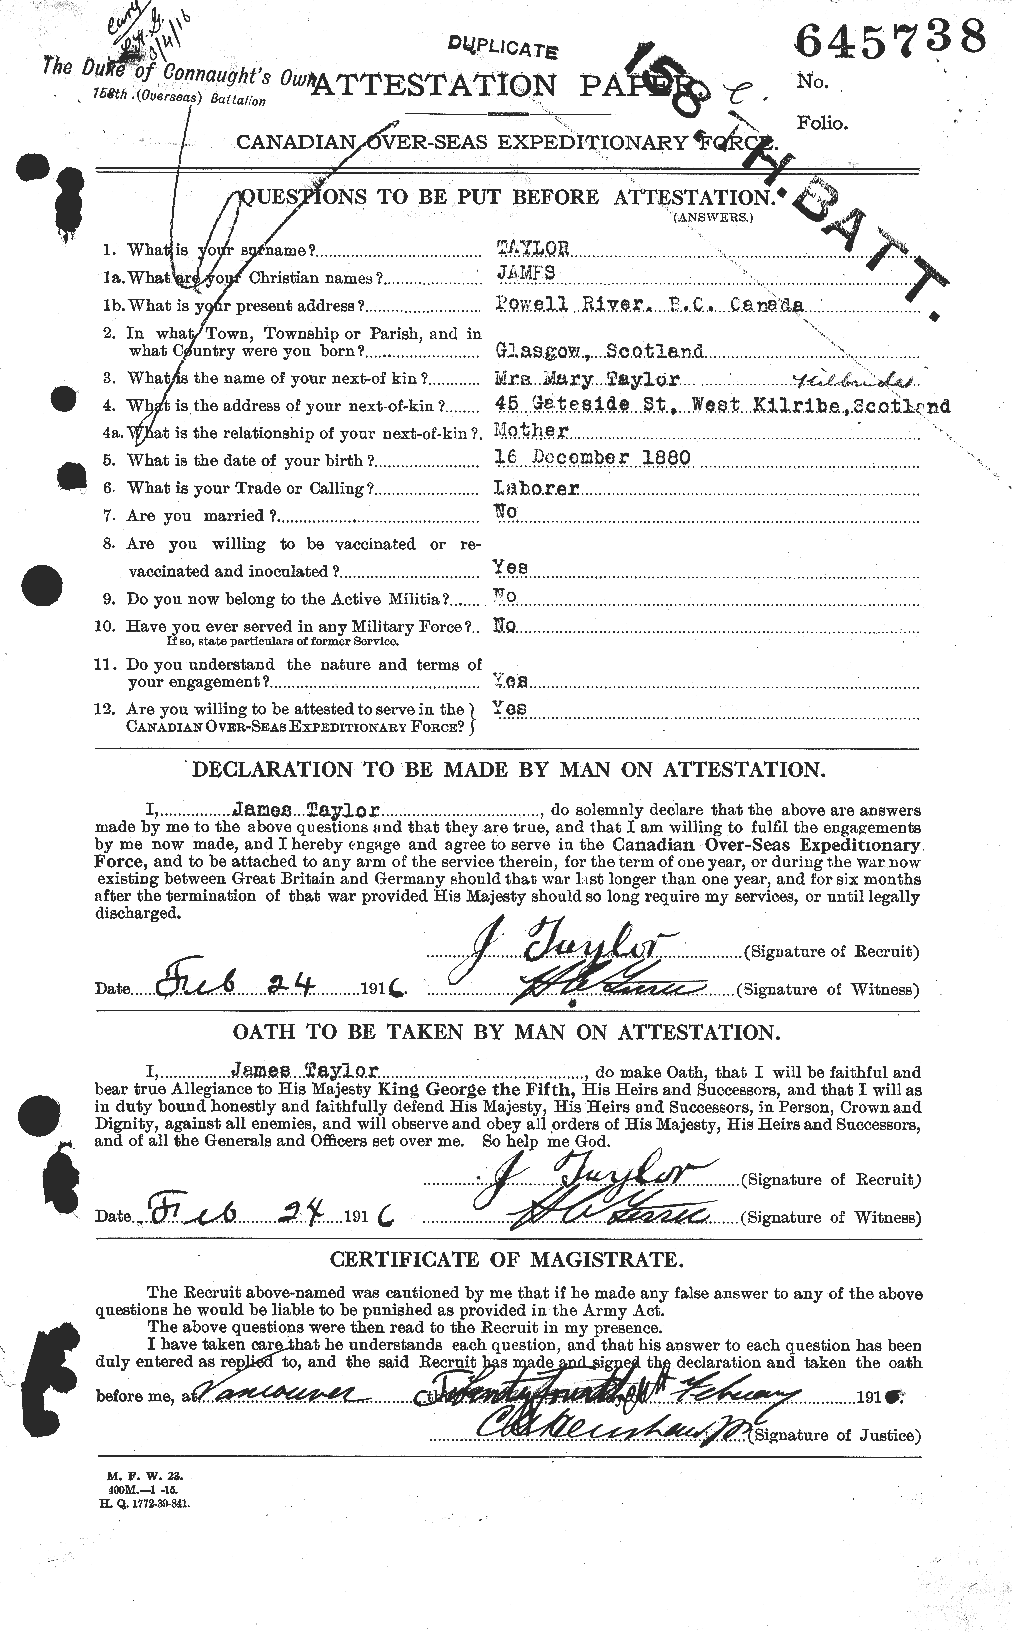 Personnel Records of the First World War - CEF 626694a